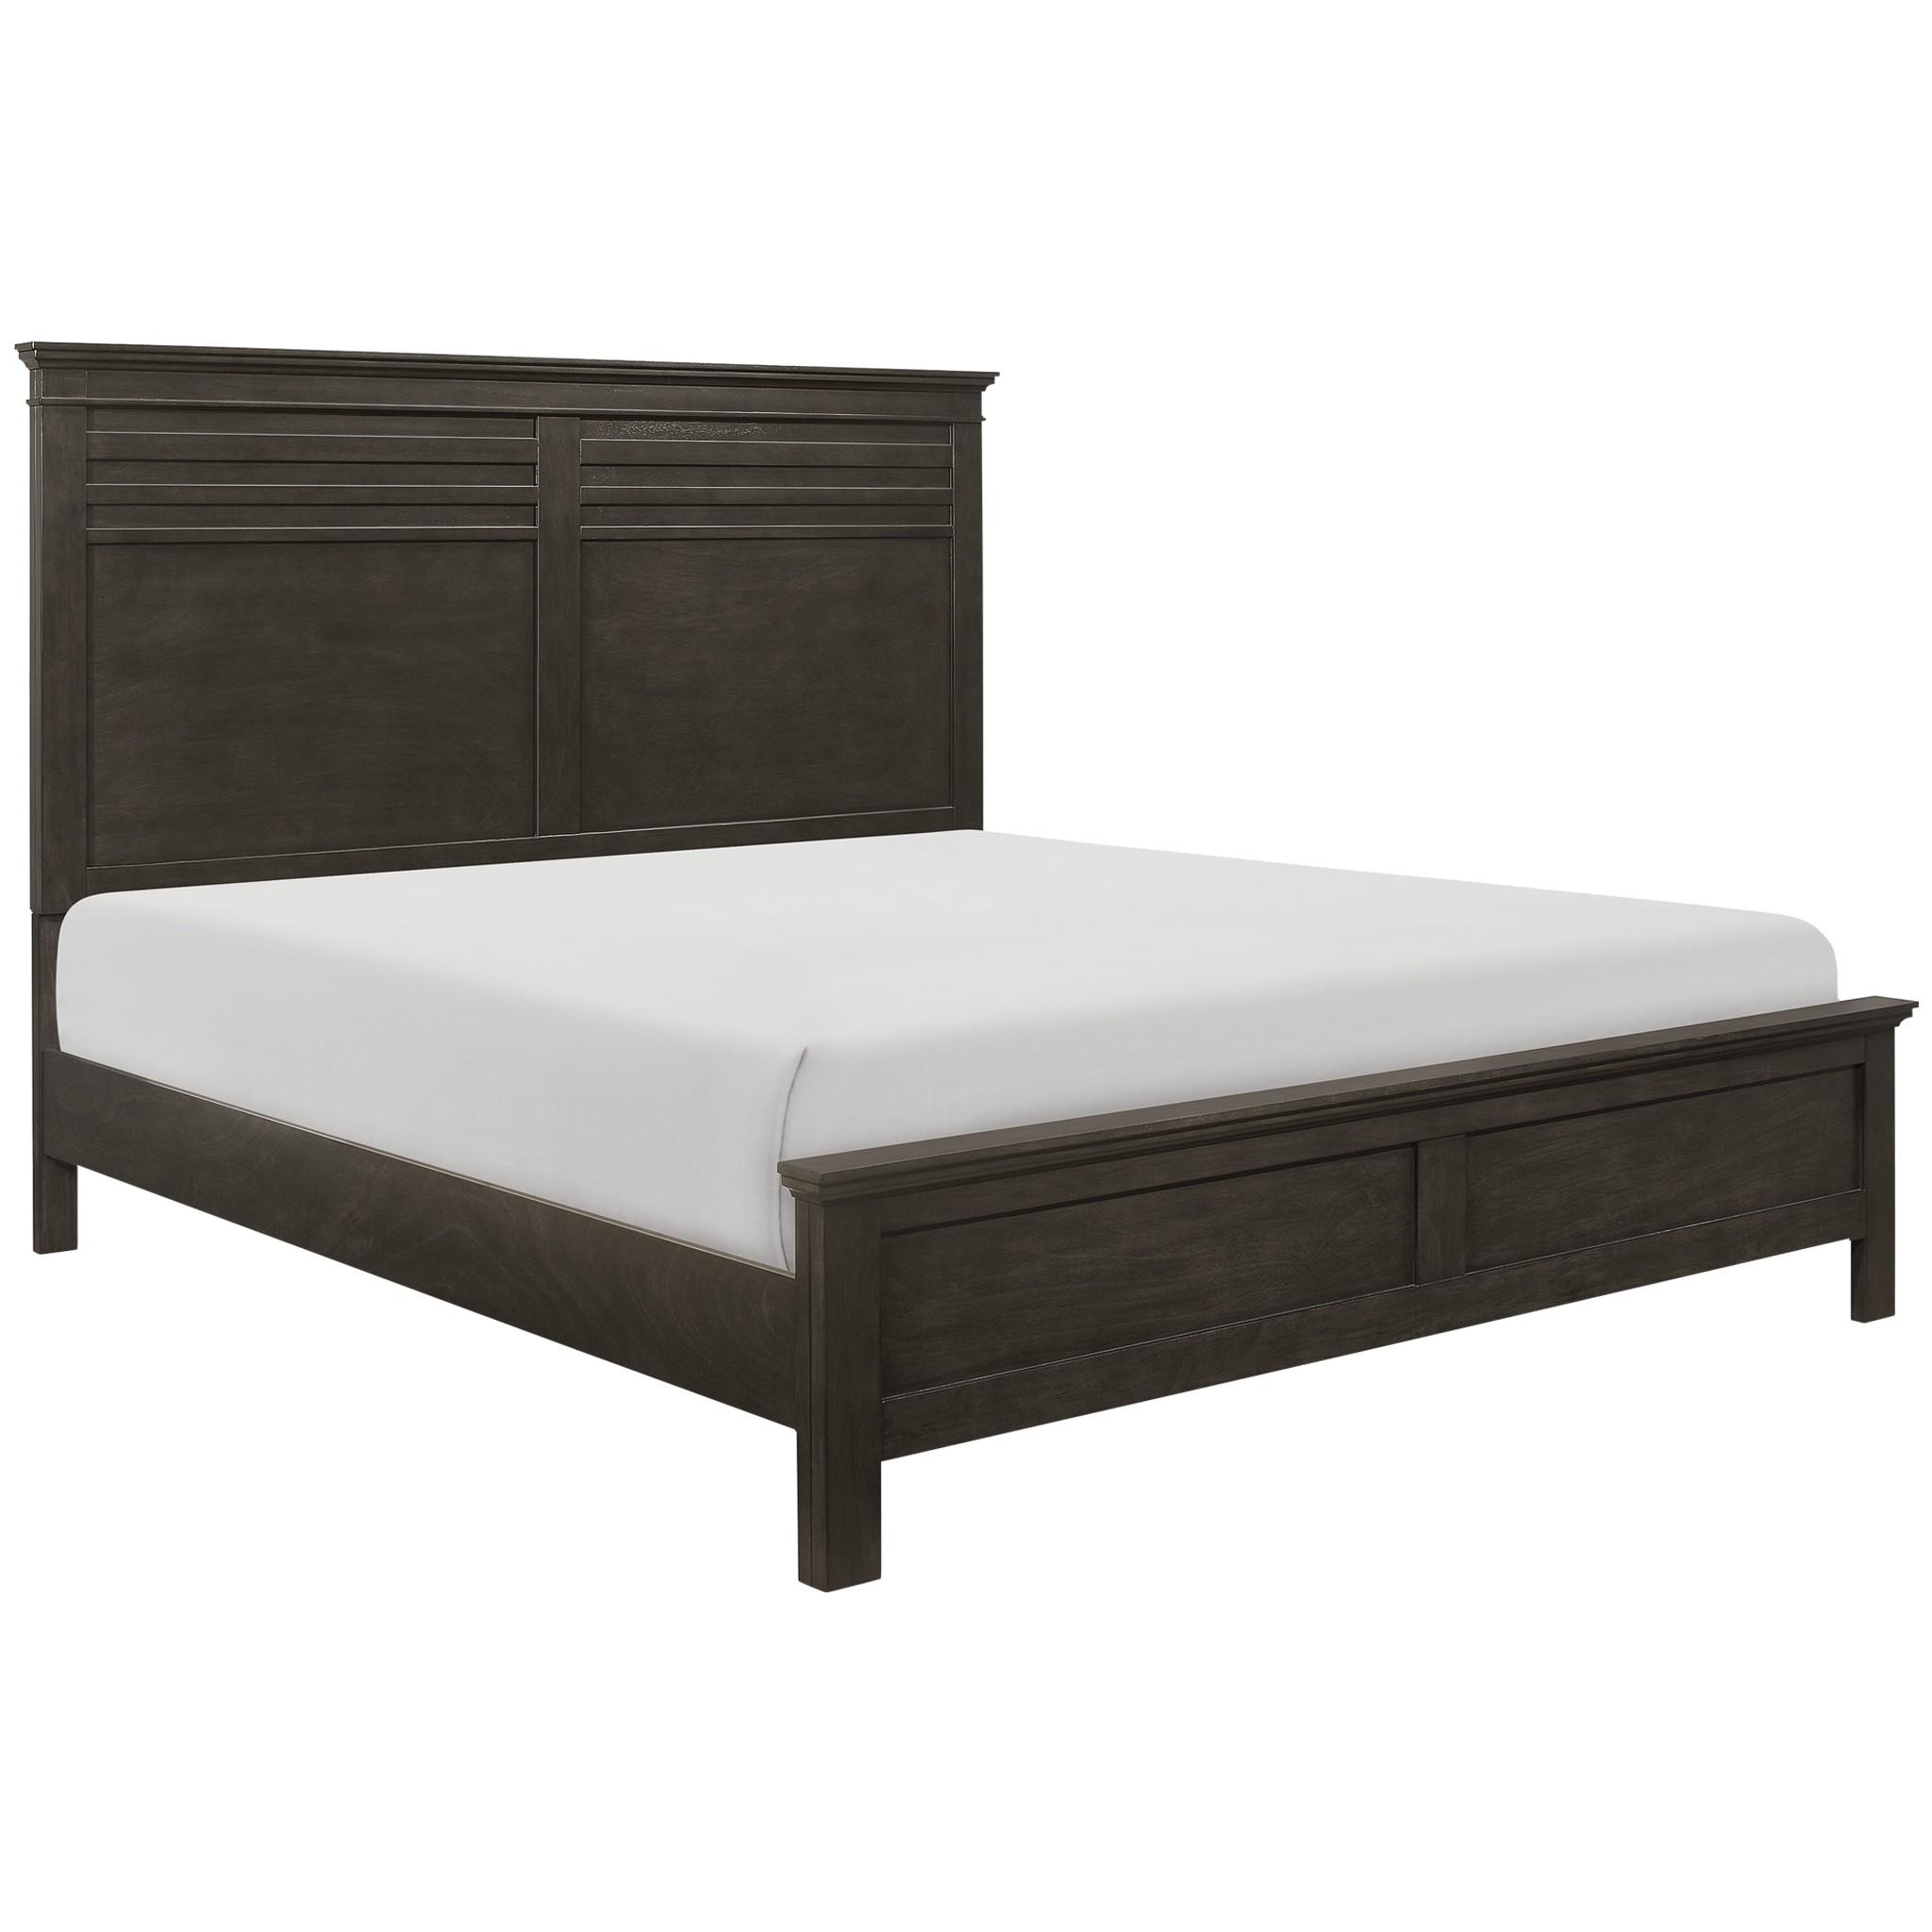 Transitional Bed 1675-1* Blaire Farm 1675-1* in Charcoal 